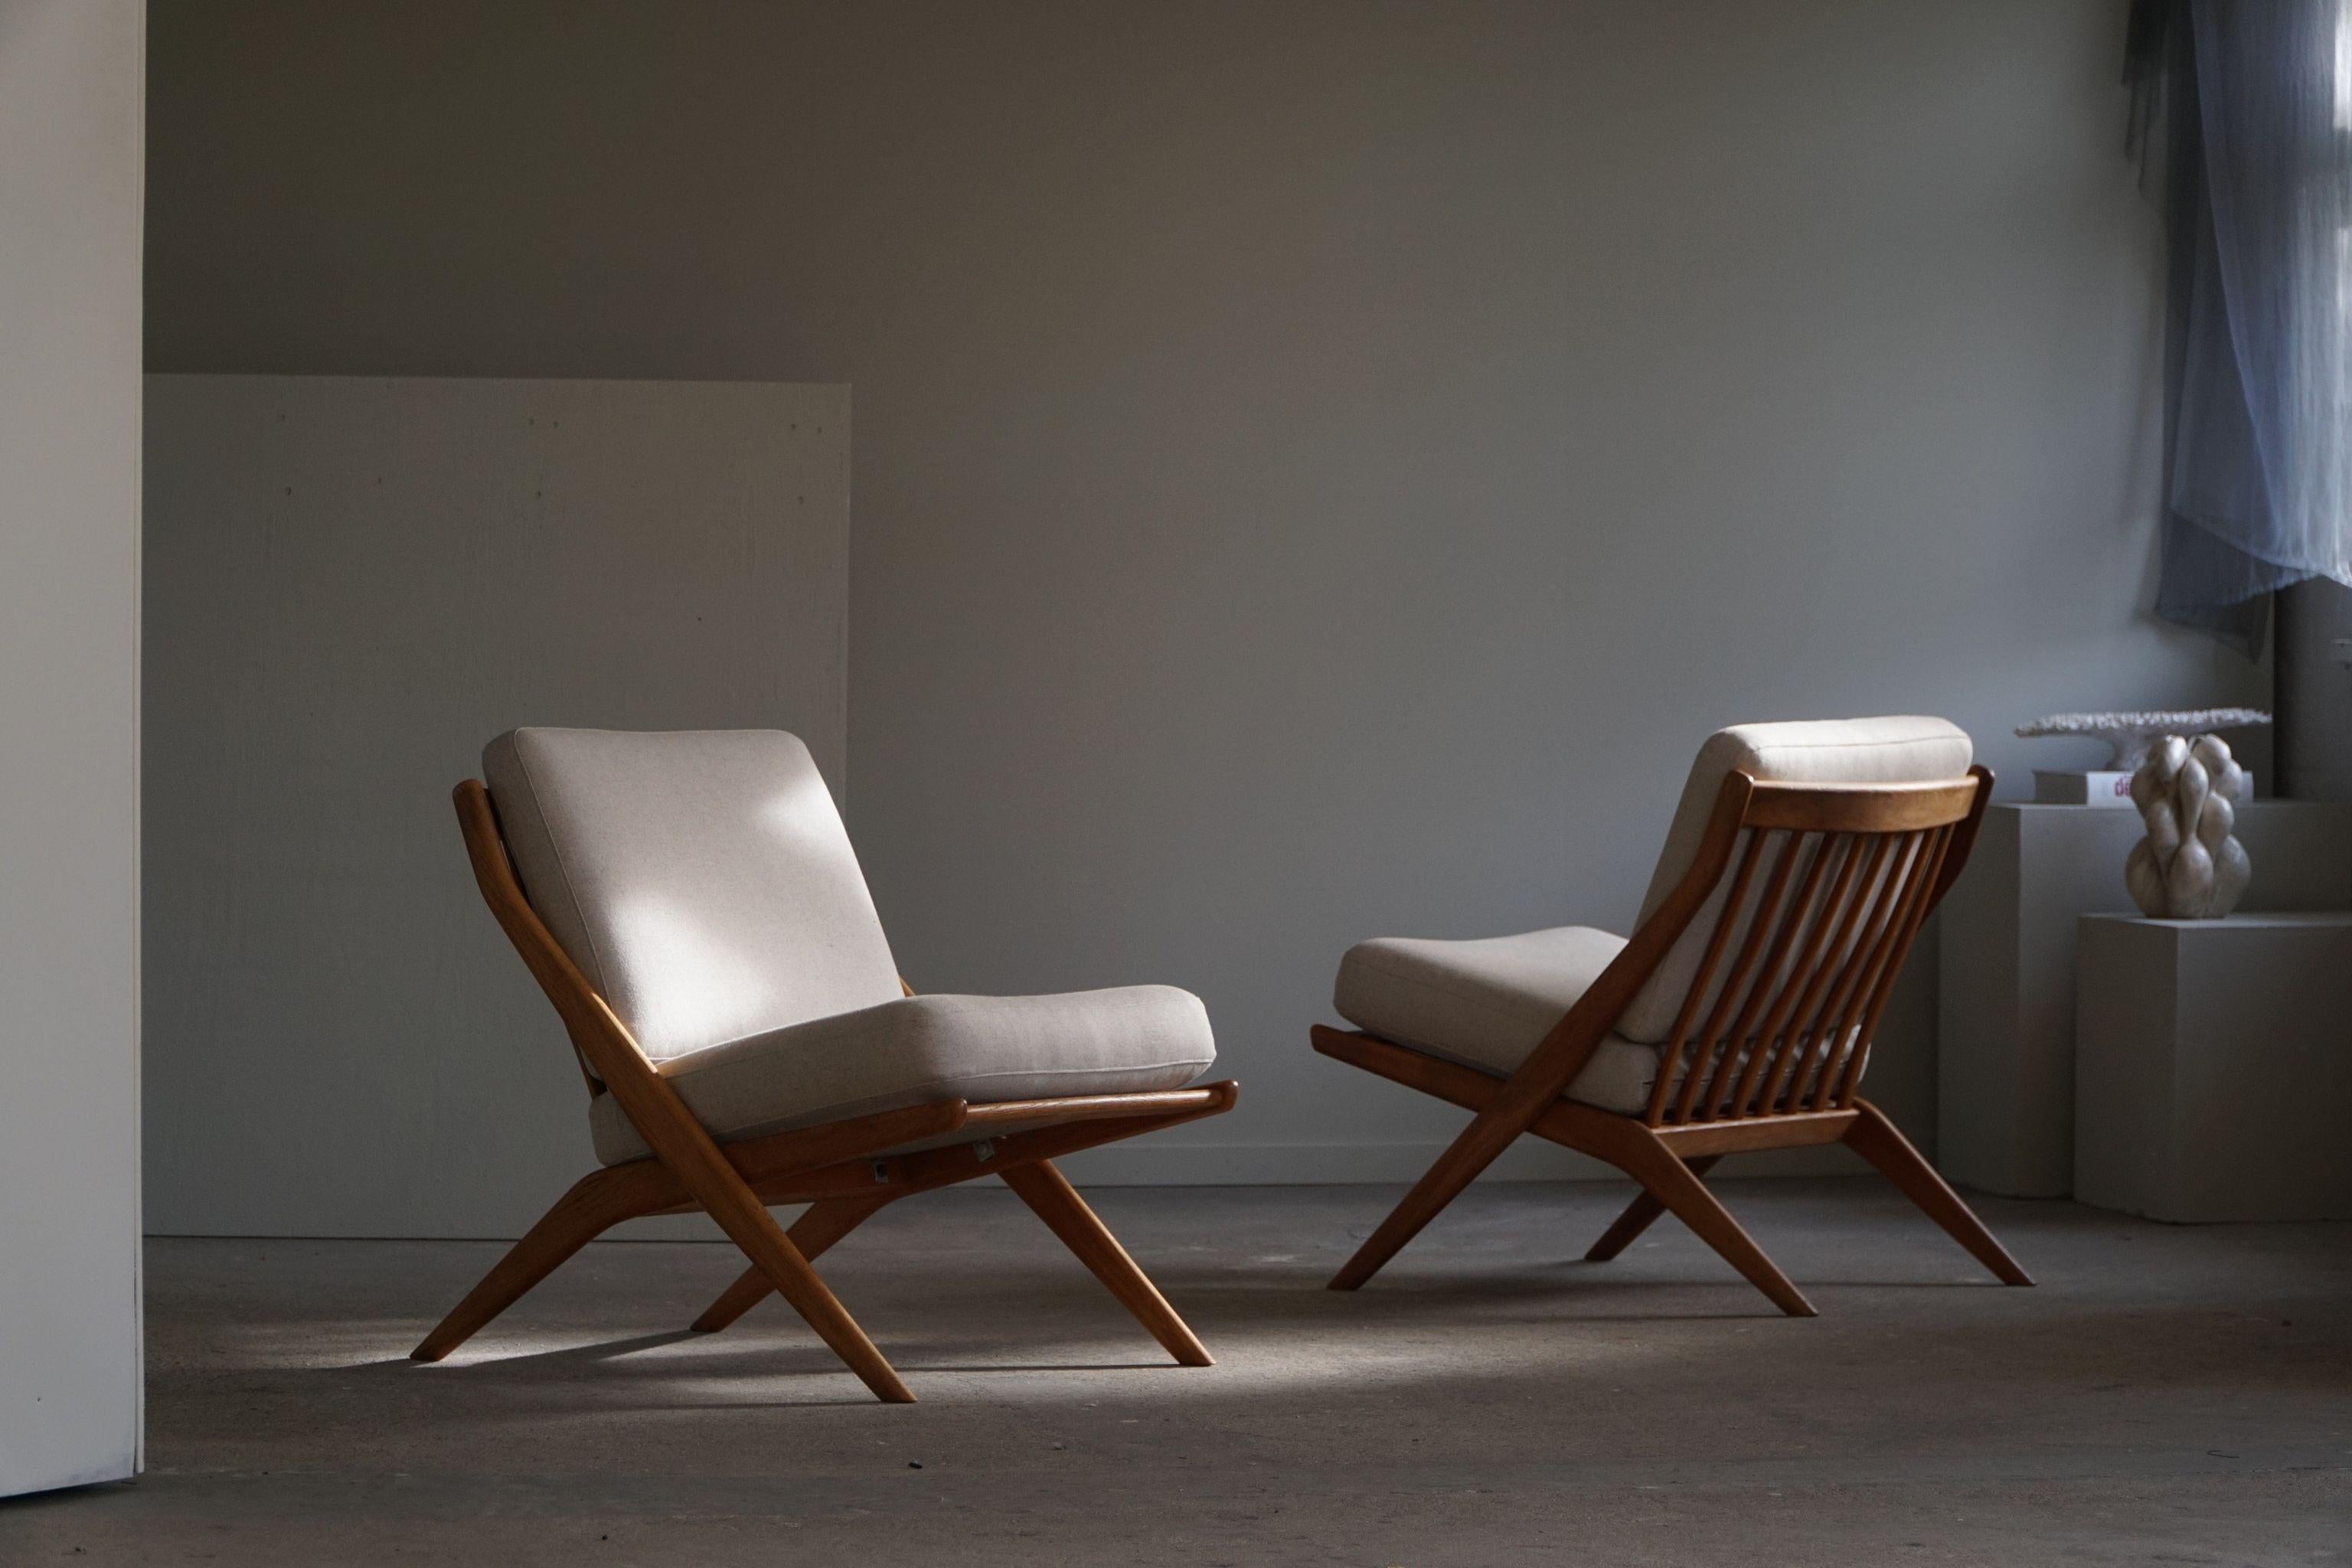 An elegant pair of mid century modern lounge chairs in oak, cushions reupholstered in high quality grey wool. Designed by Folke Ohlsson for the Swedish company AB Svenska Möbelfabrikerna Bodafors in 1961. Model 